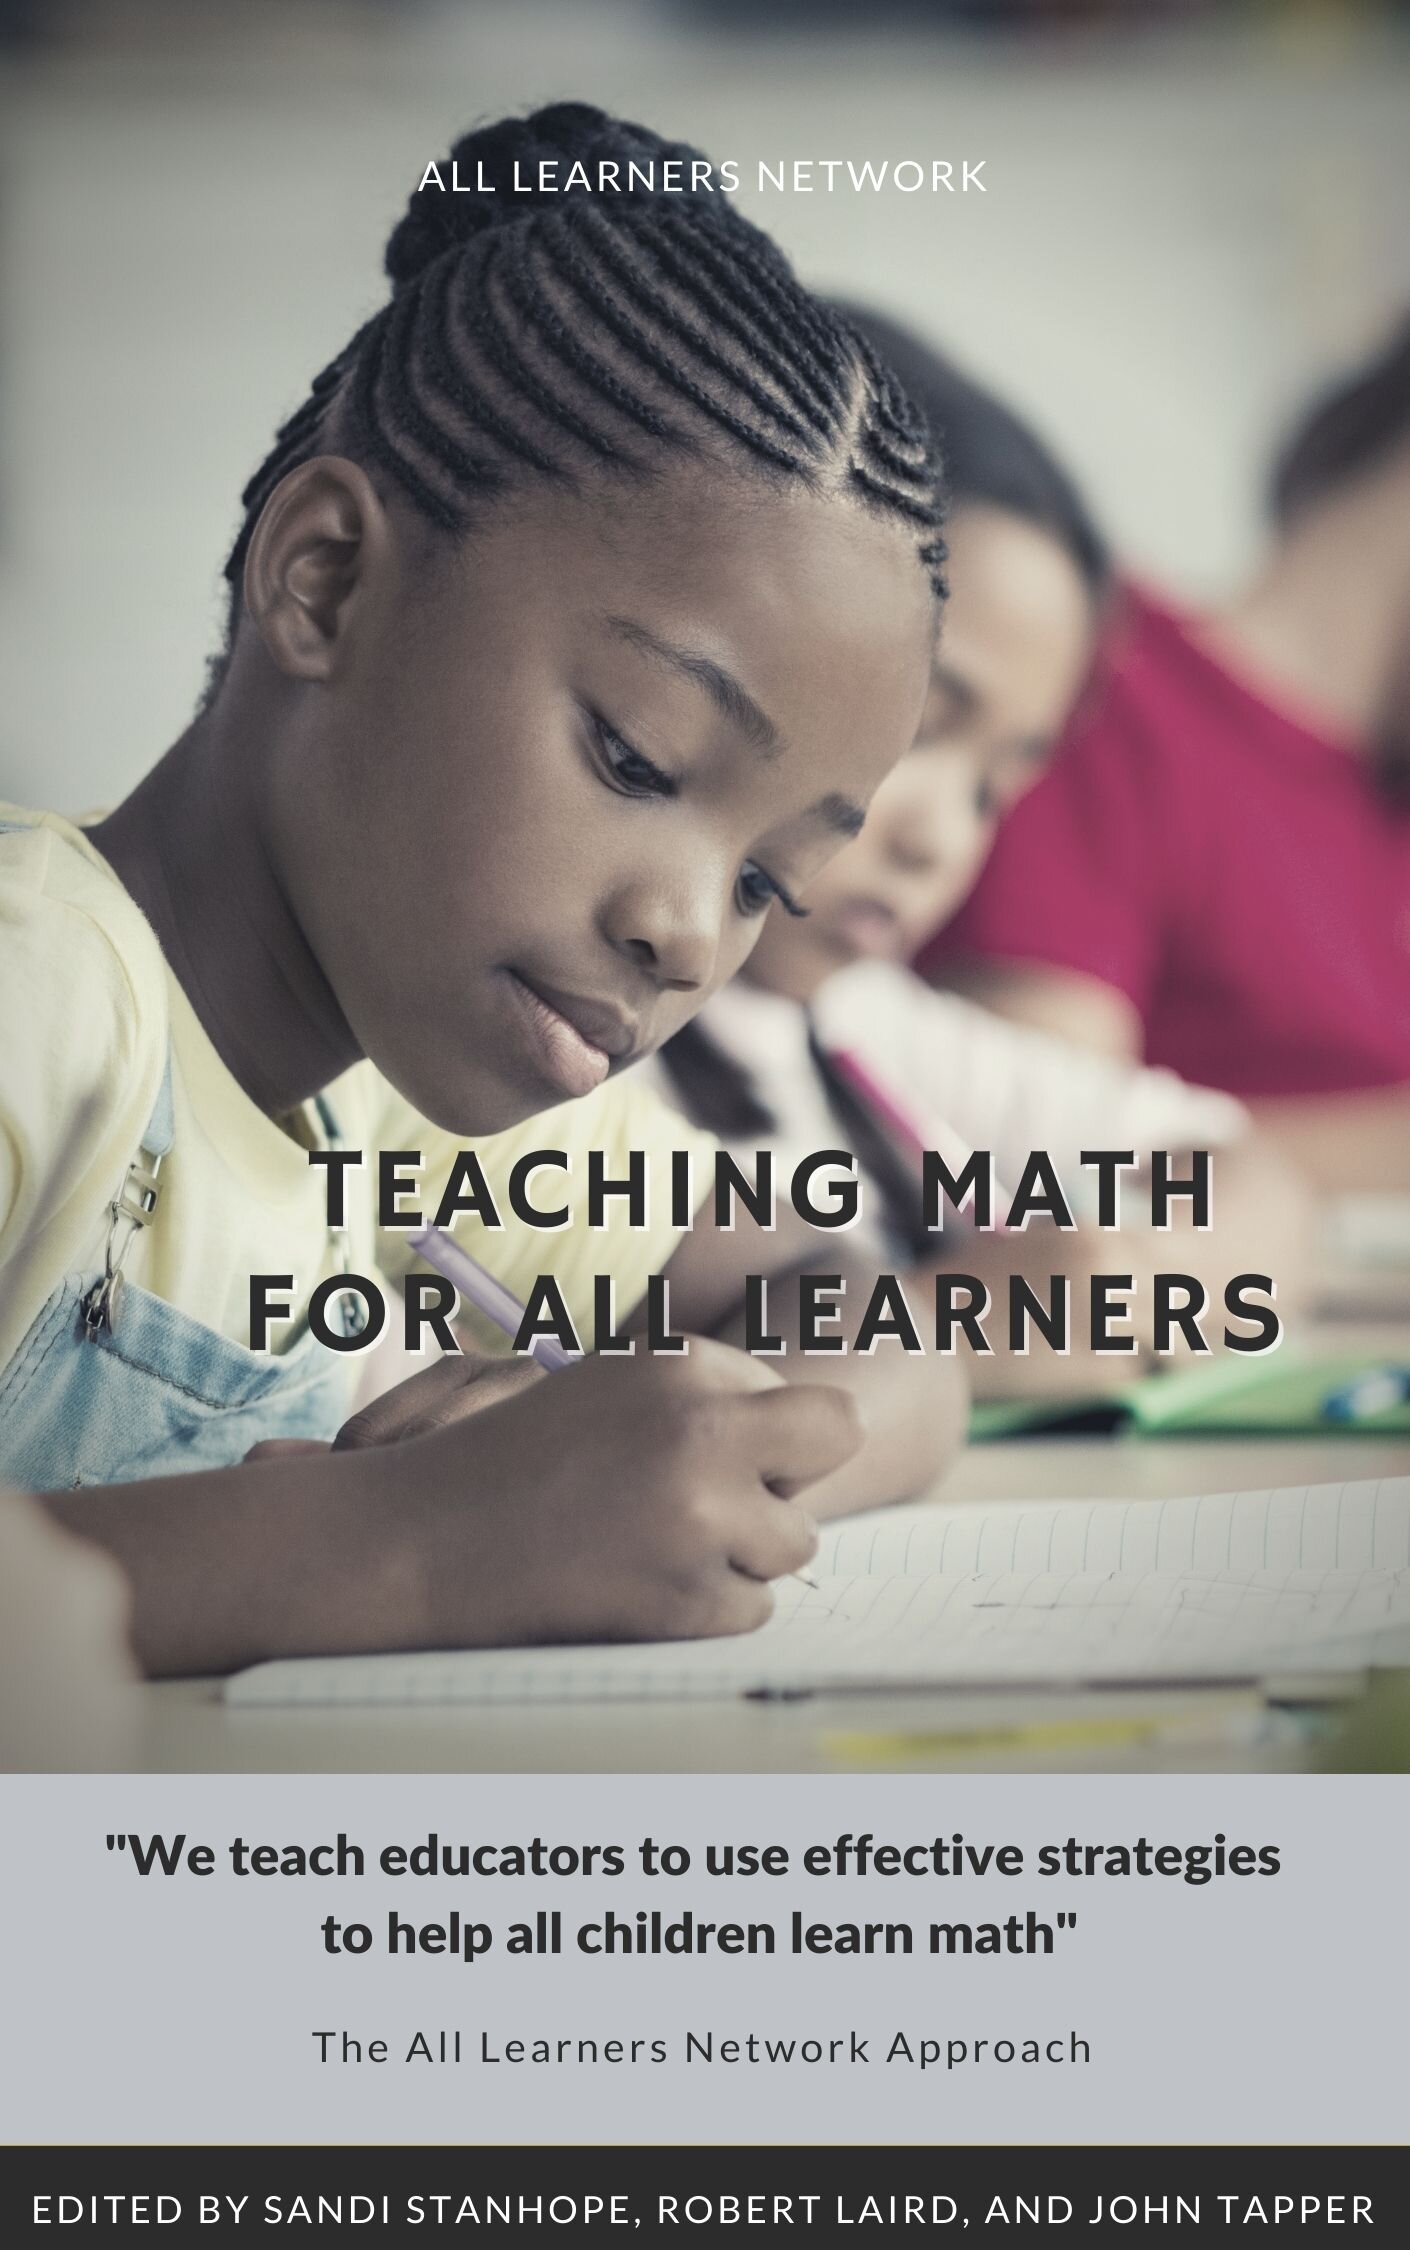 The cover of ALN’s new book — “Teaching Math for All Learners”